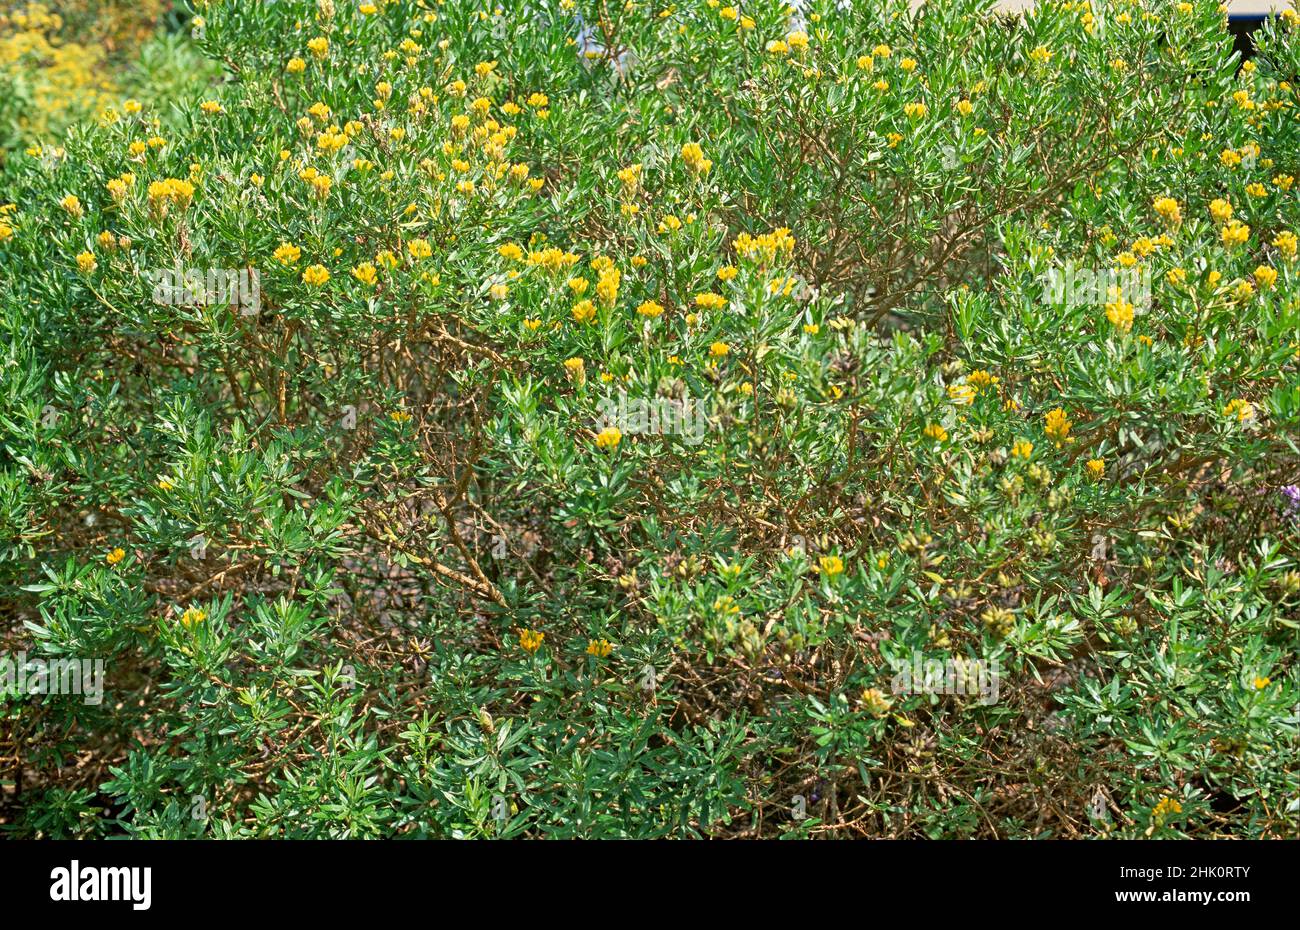 Needle-leaved broom (Genista linifolia) is a shrub native to Canary Islands, southern Iberian Peninsula and northwestern Africa. Stock Photo